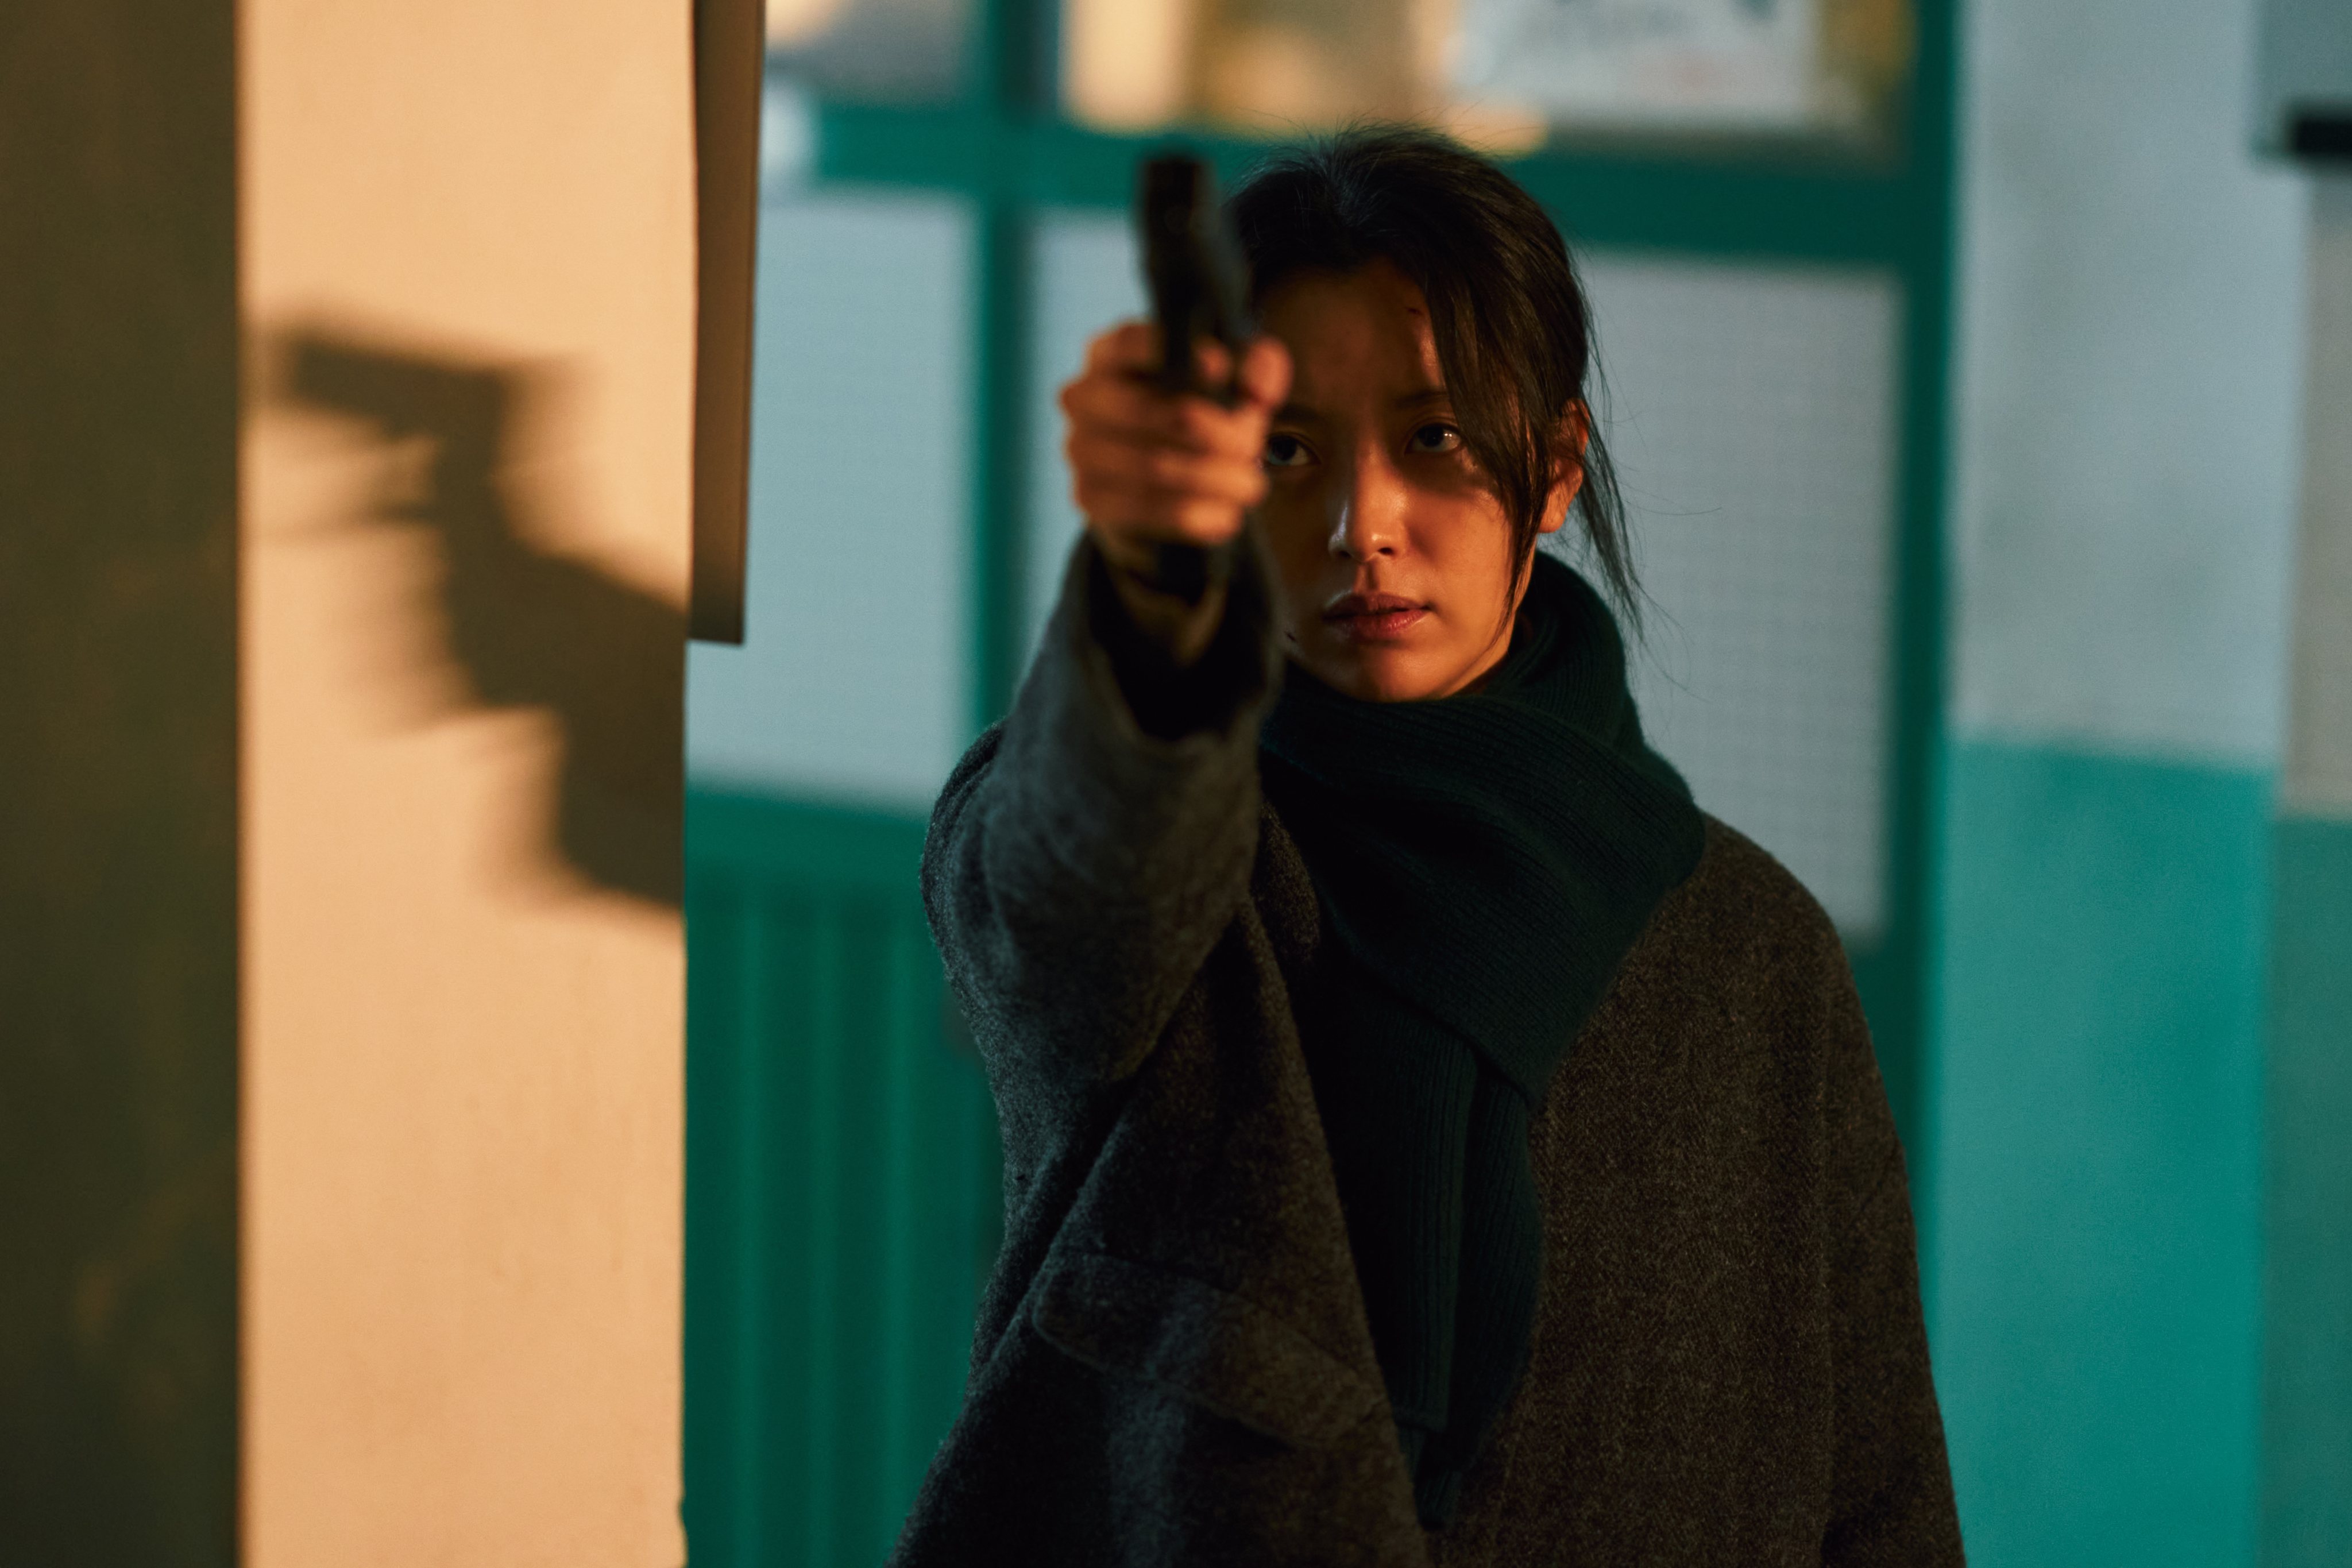 Han Hyo-joo in a still from “Moving”.